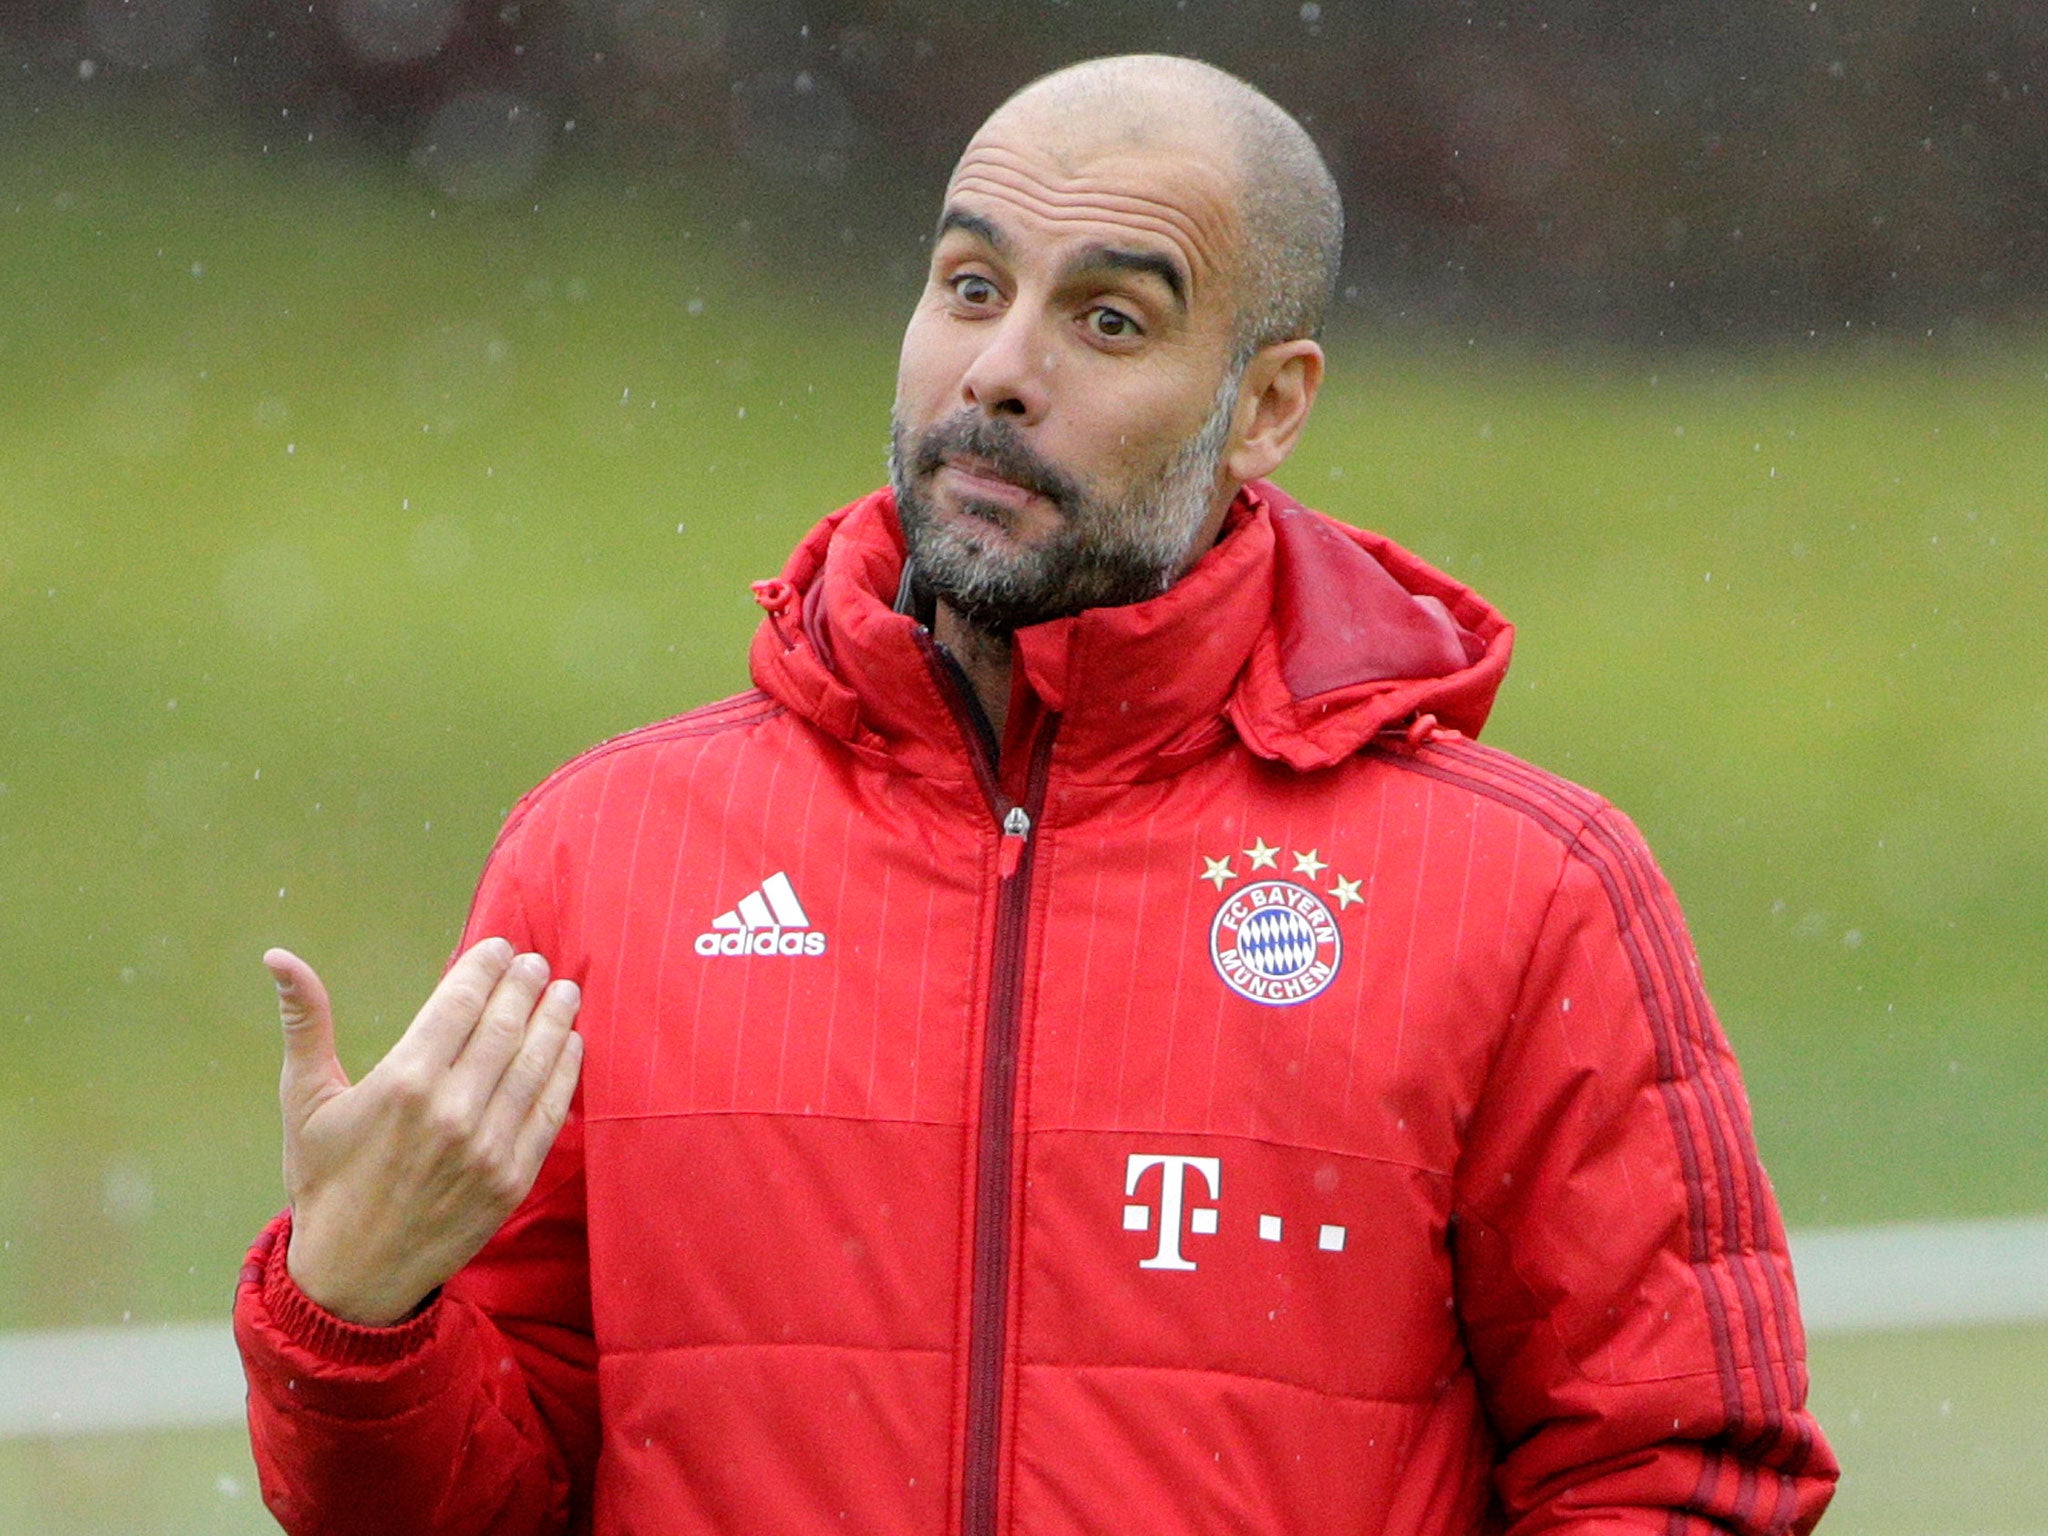 Pep Guardiola's spell at Bayern comes to an end on Saturday as his side face Borussia Dortmund in the German Cup final in Berlin